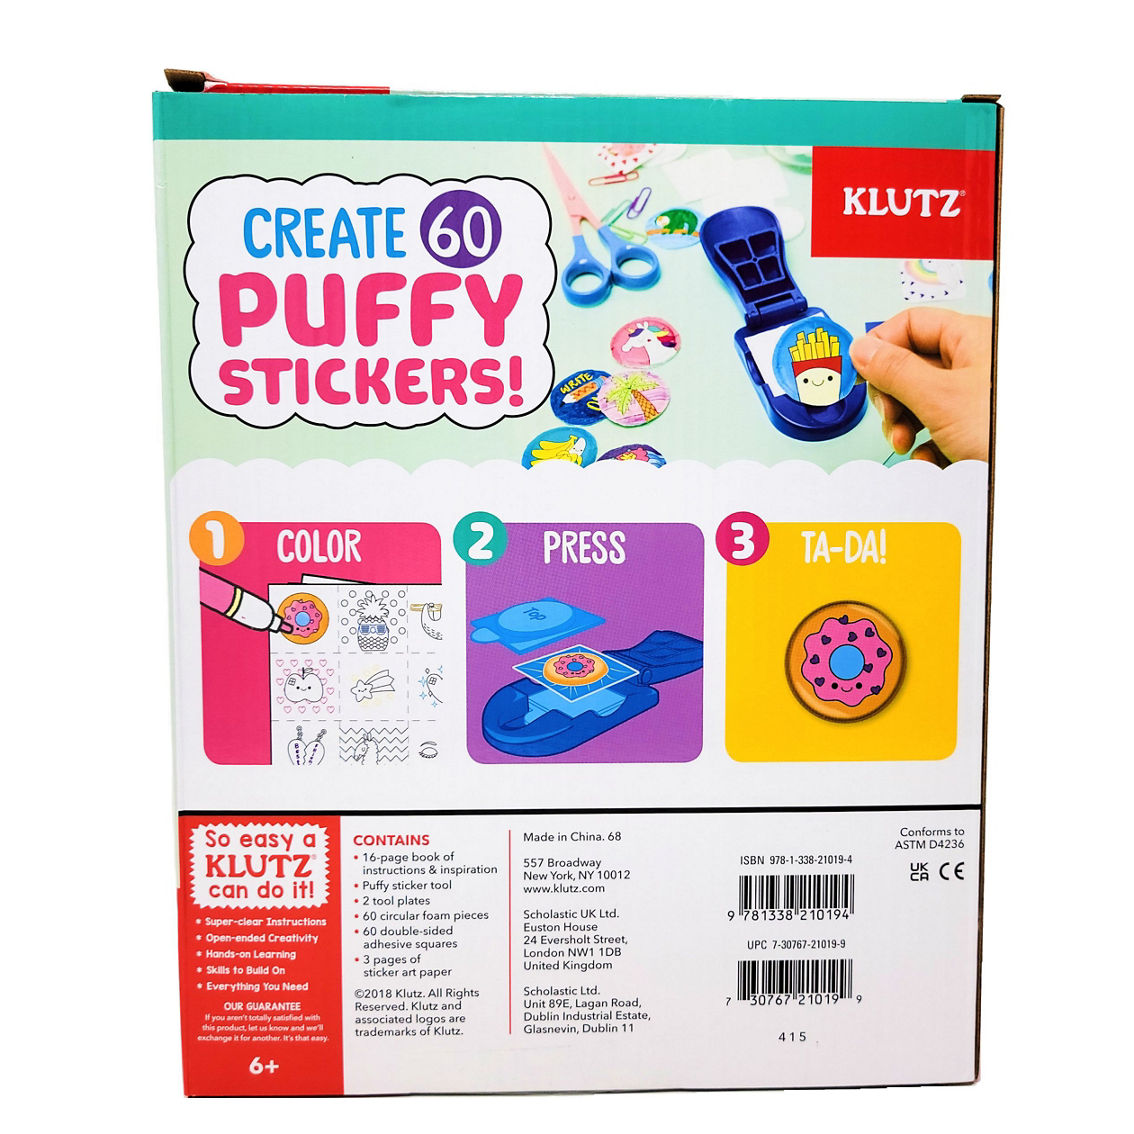 Klutz Make Your Own Puffy Stickers - Image 4 of 5